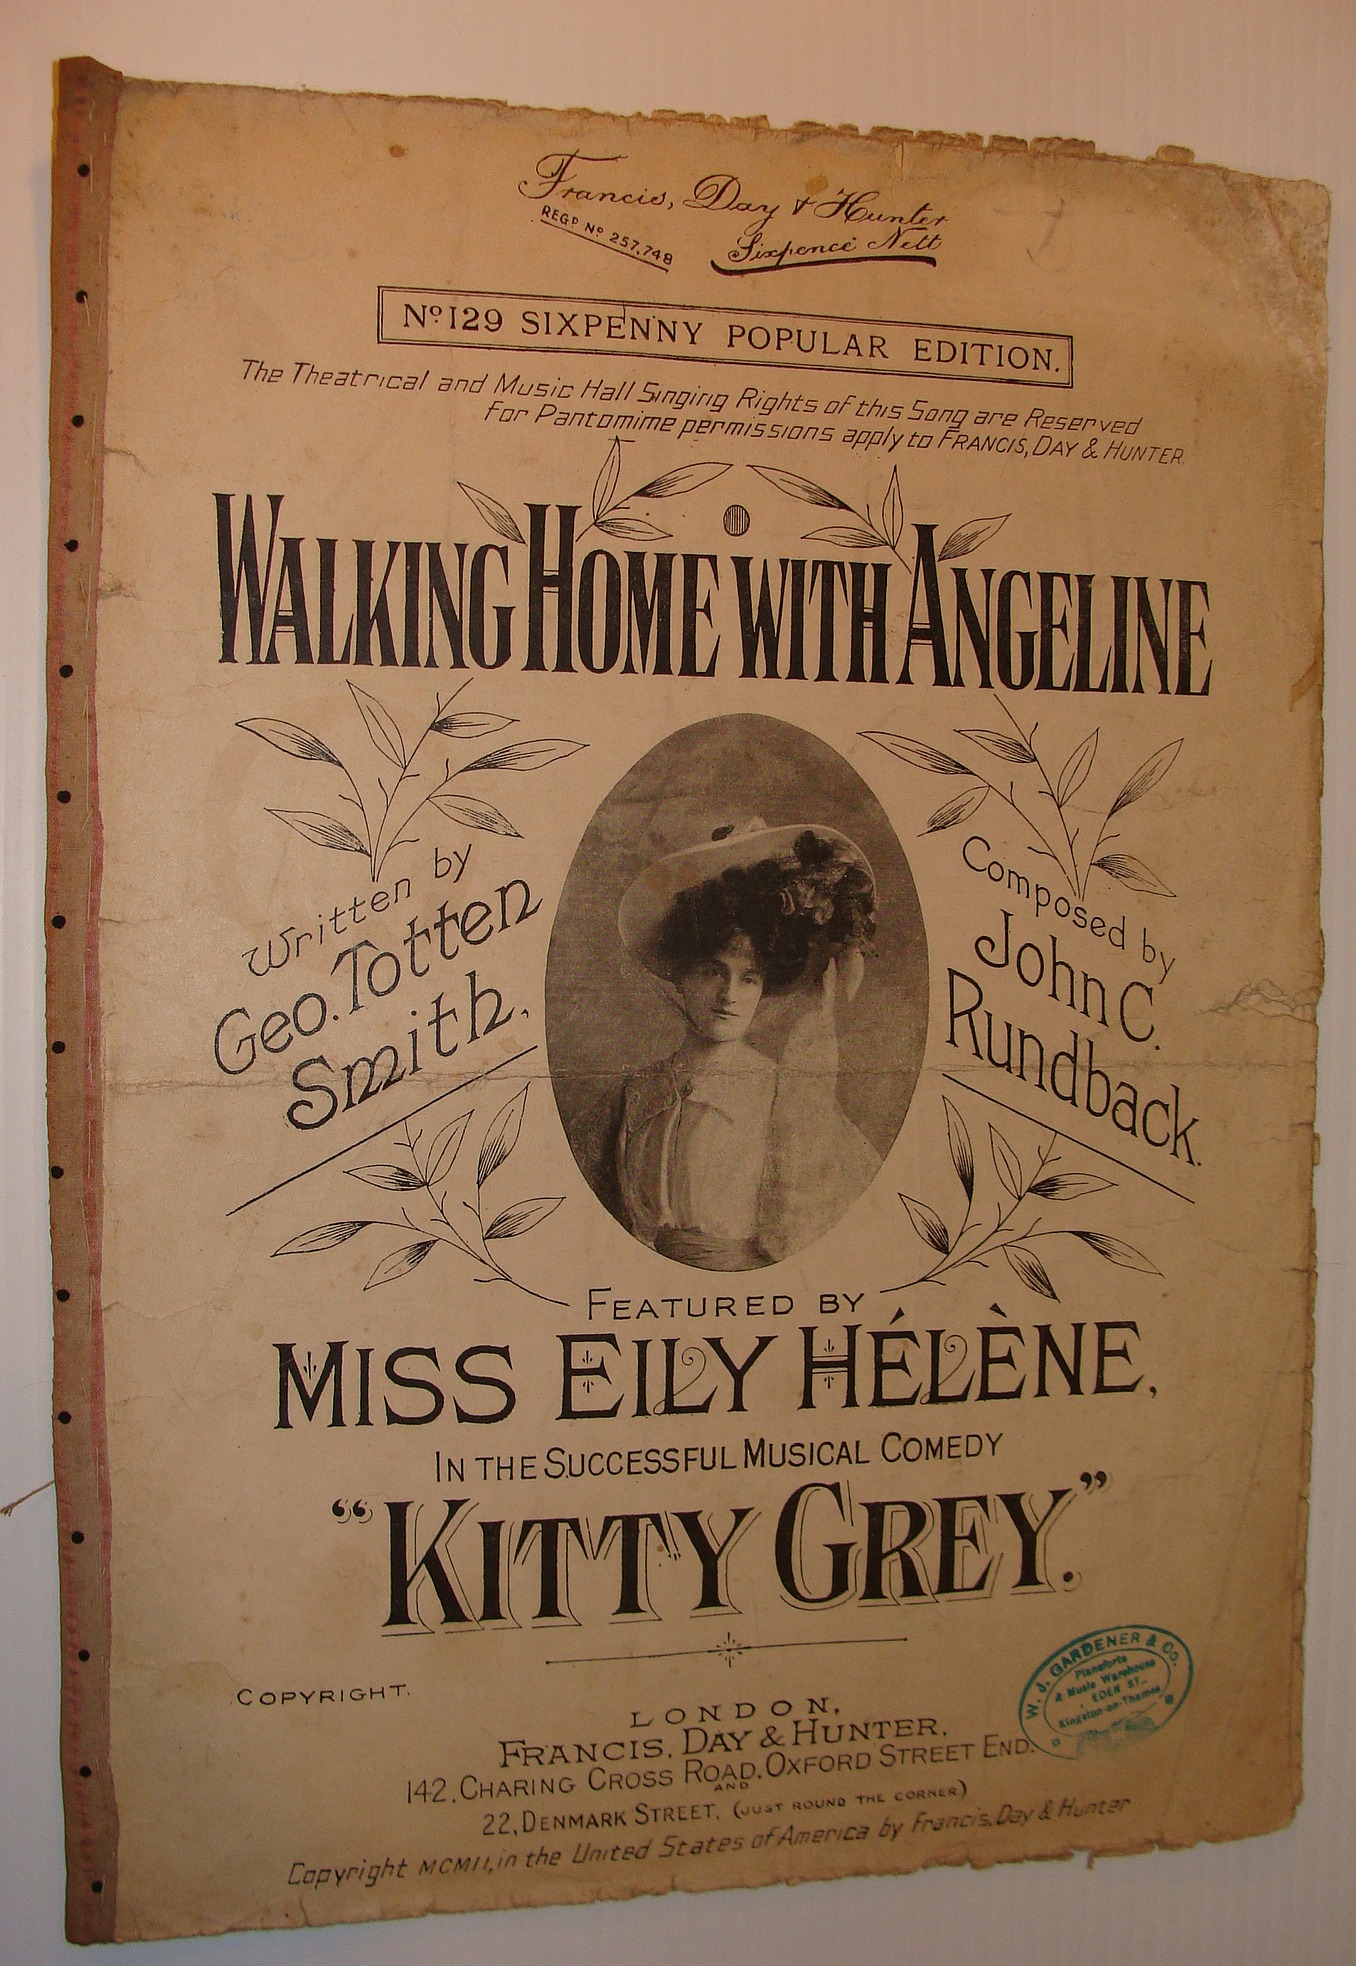 SMITH, GEORGE TOTTEN; RUNDBACK, JOHN C. - Walking Home with Angeline: Sheet Music for Voice and Piano - Featured by Miss Eily Helene in the Successful Musical Comedy Kitty Grey